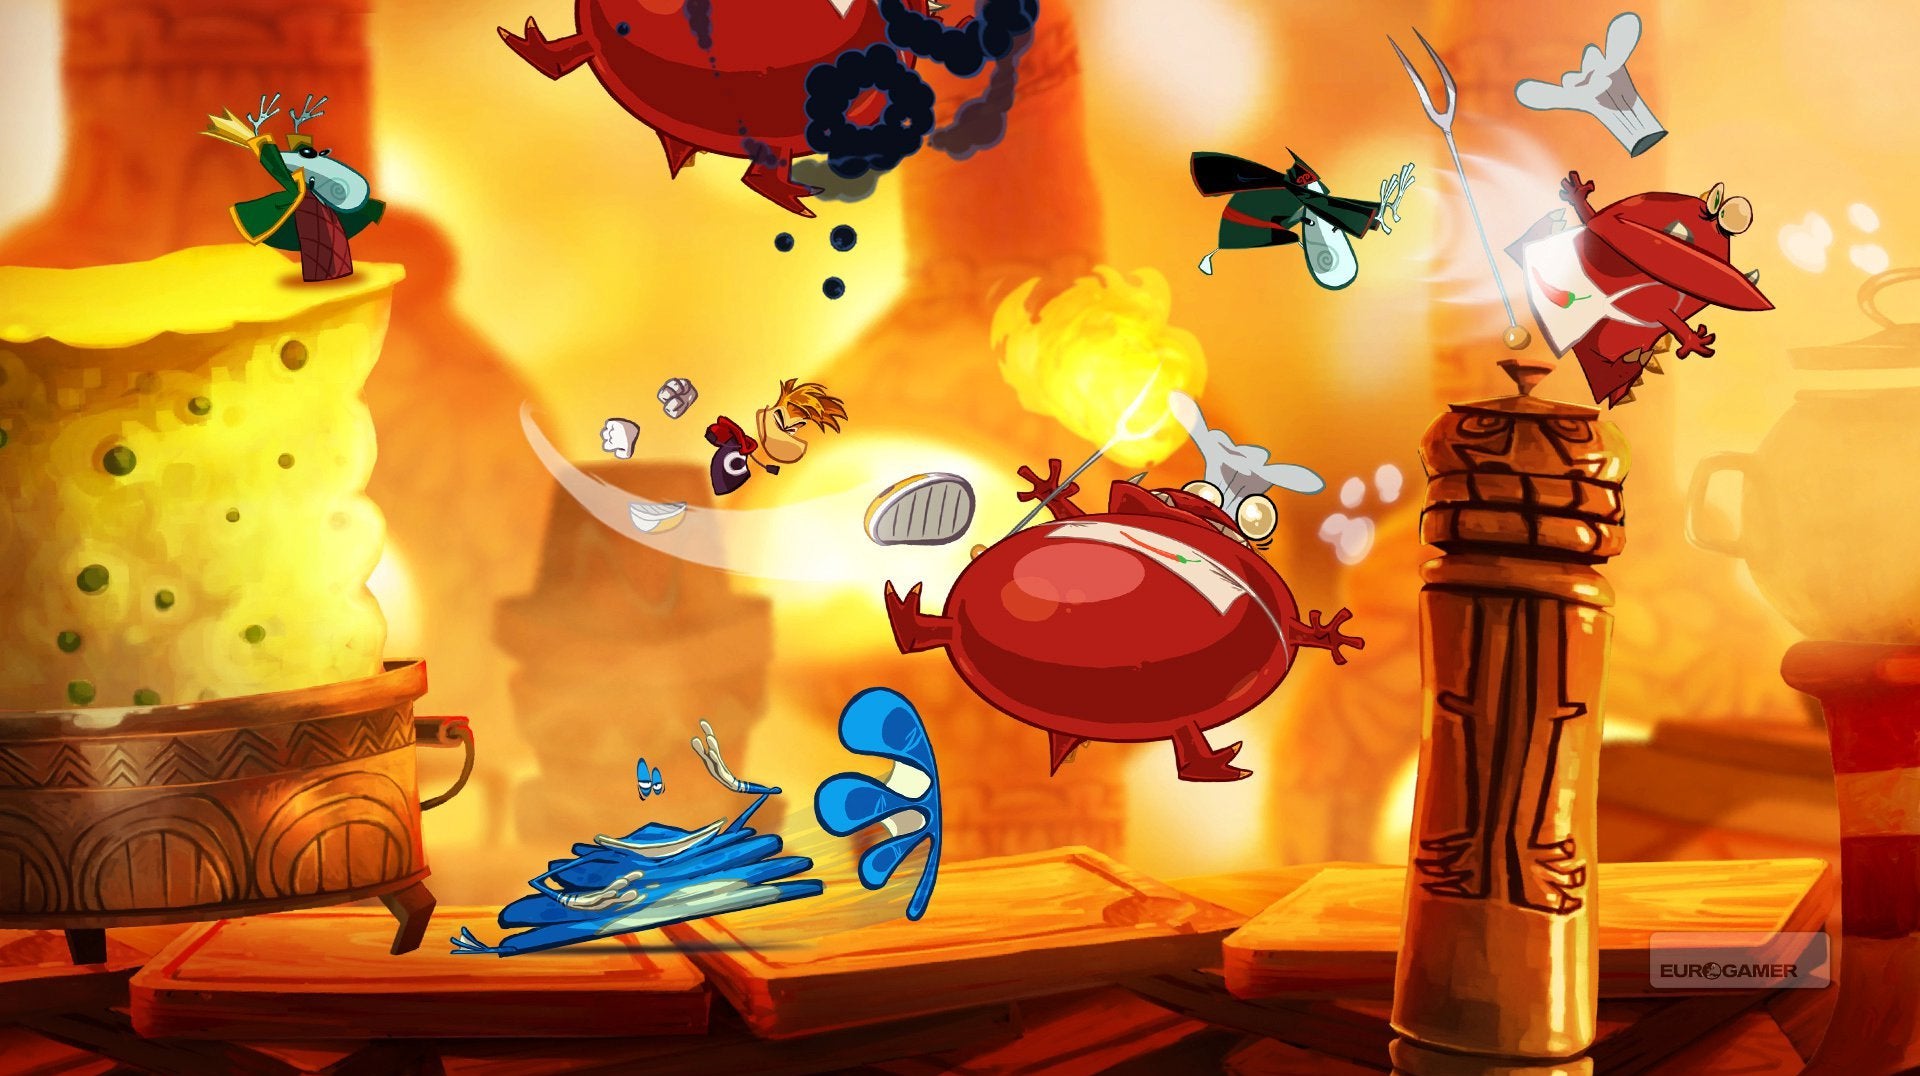 Image for Rayman Origins is currently free on PC